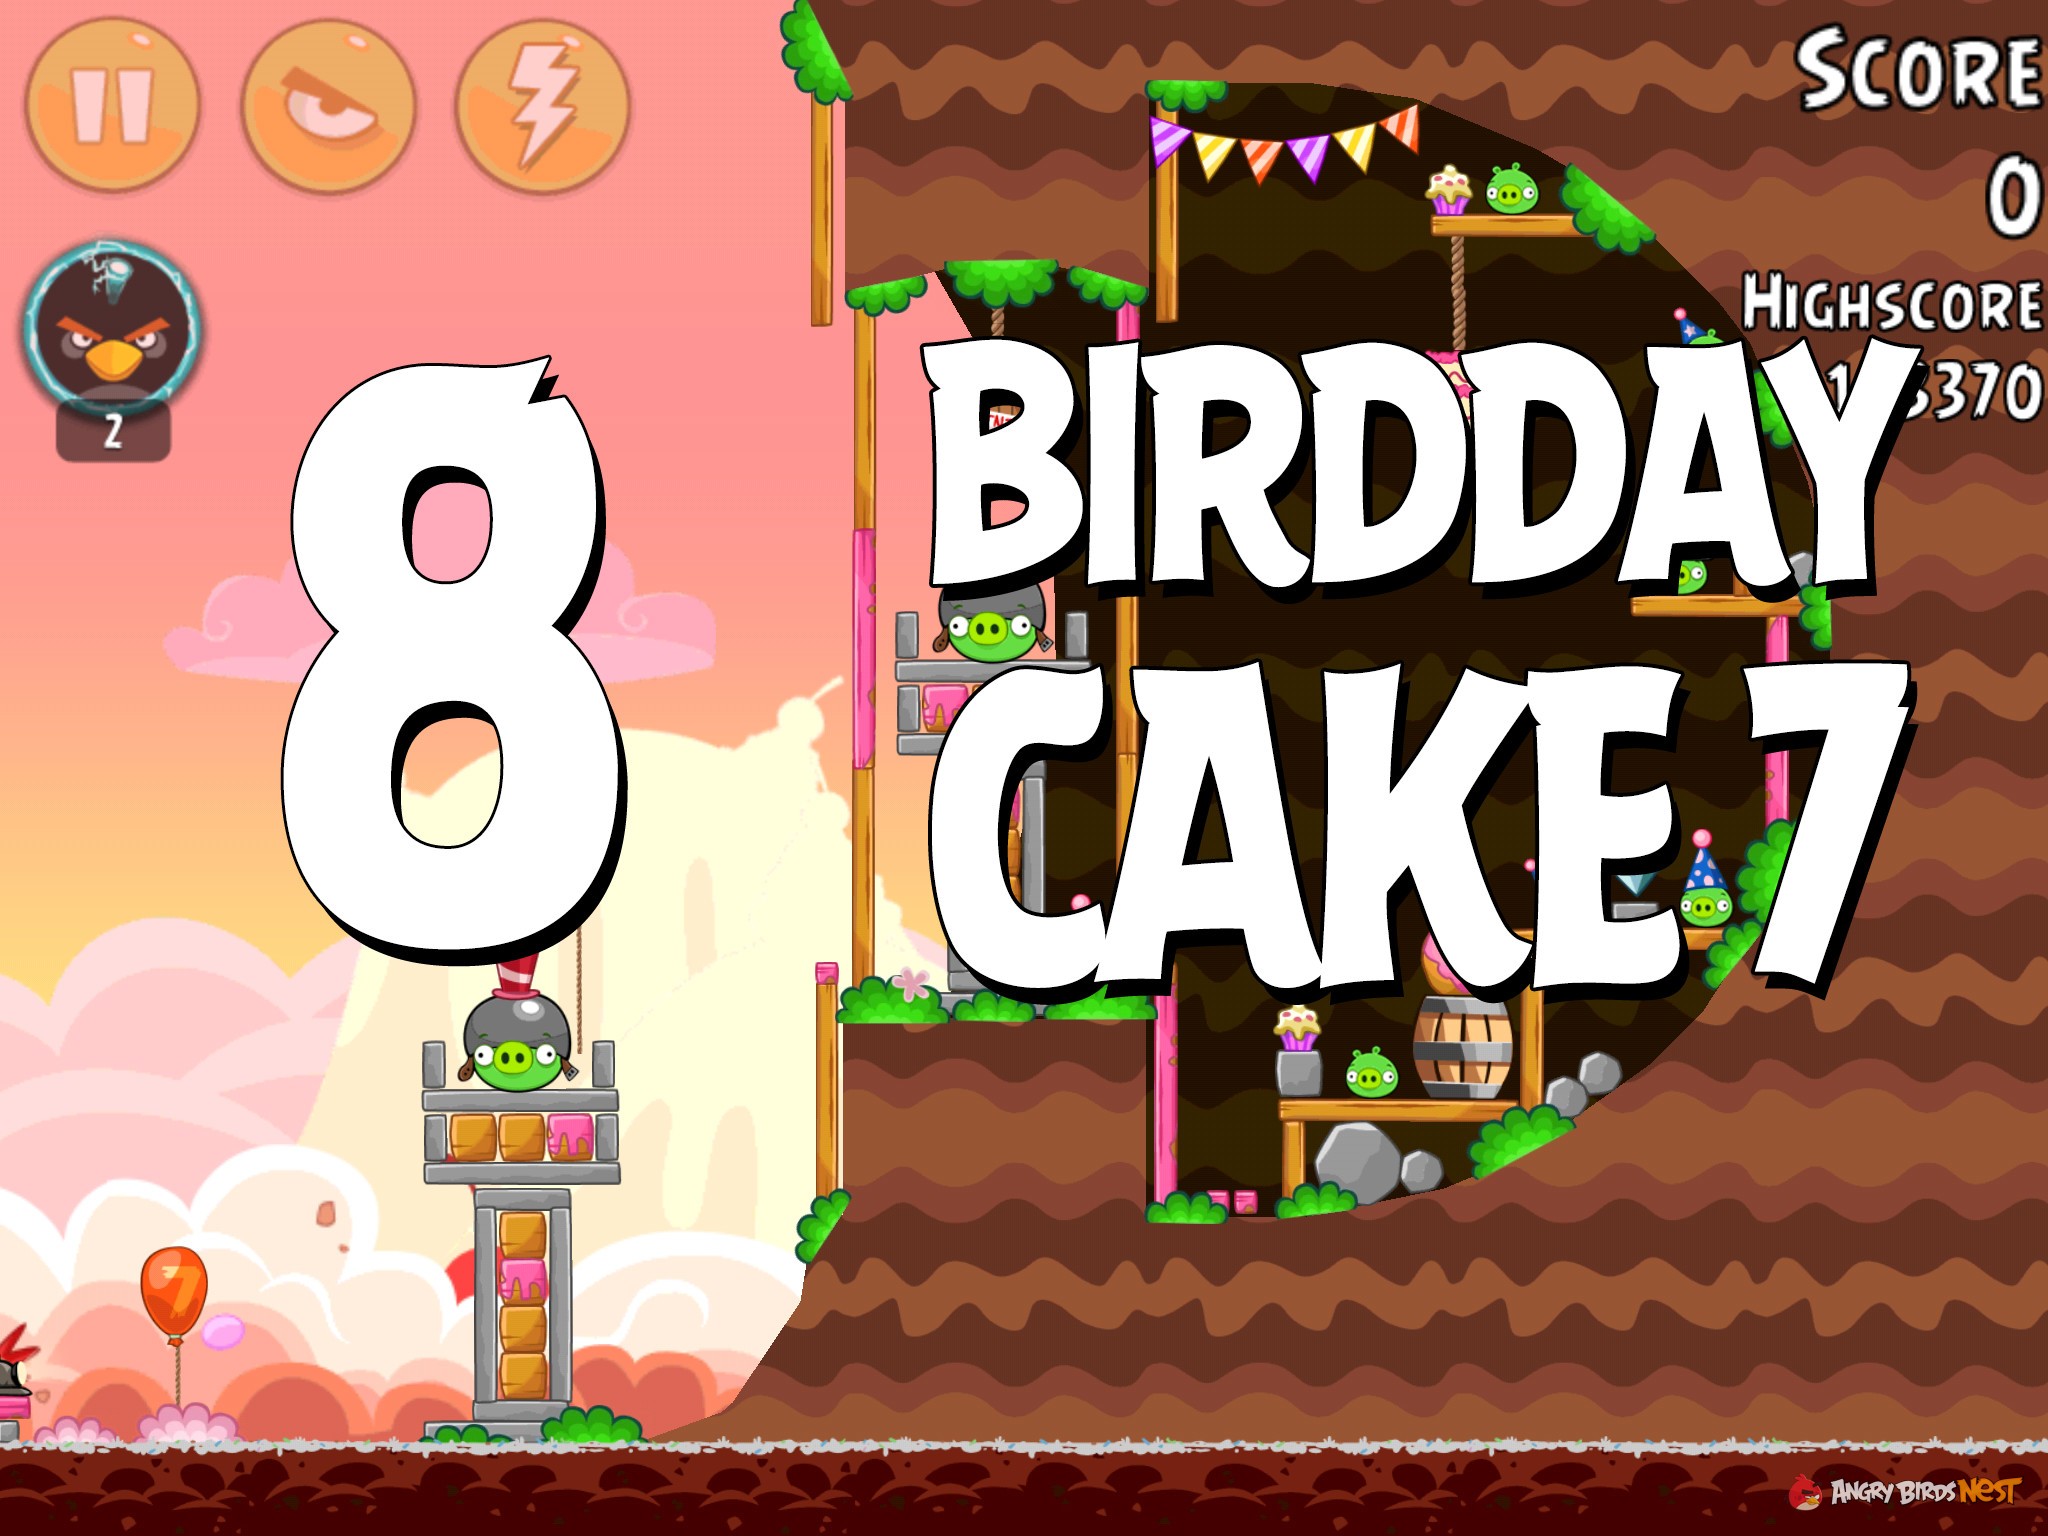 Angry-Birds-Birdday-Party-Cake-7-Level-8